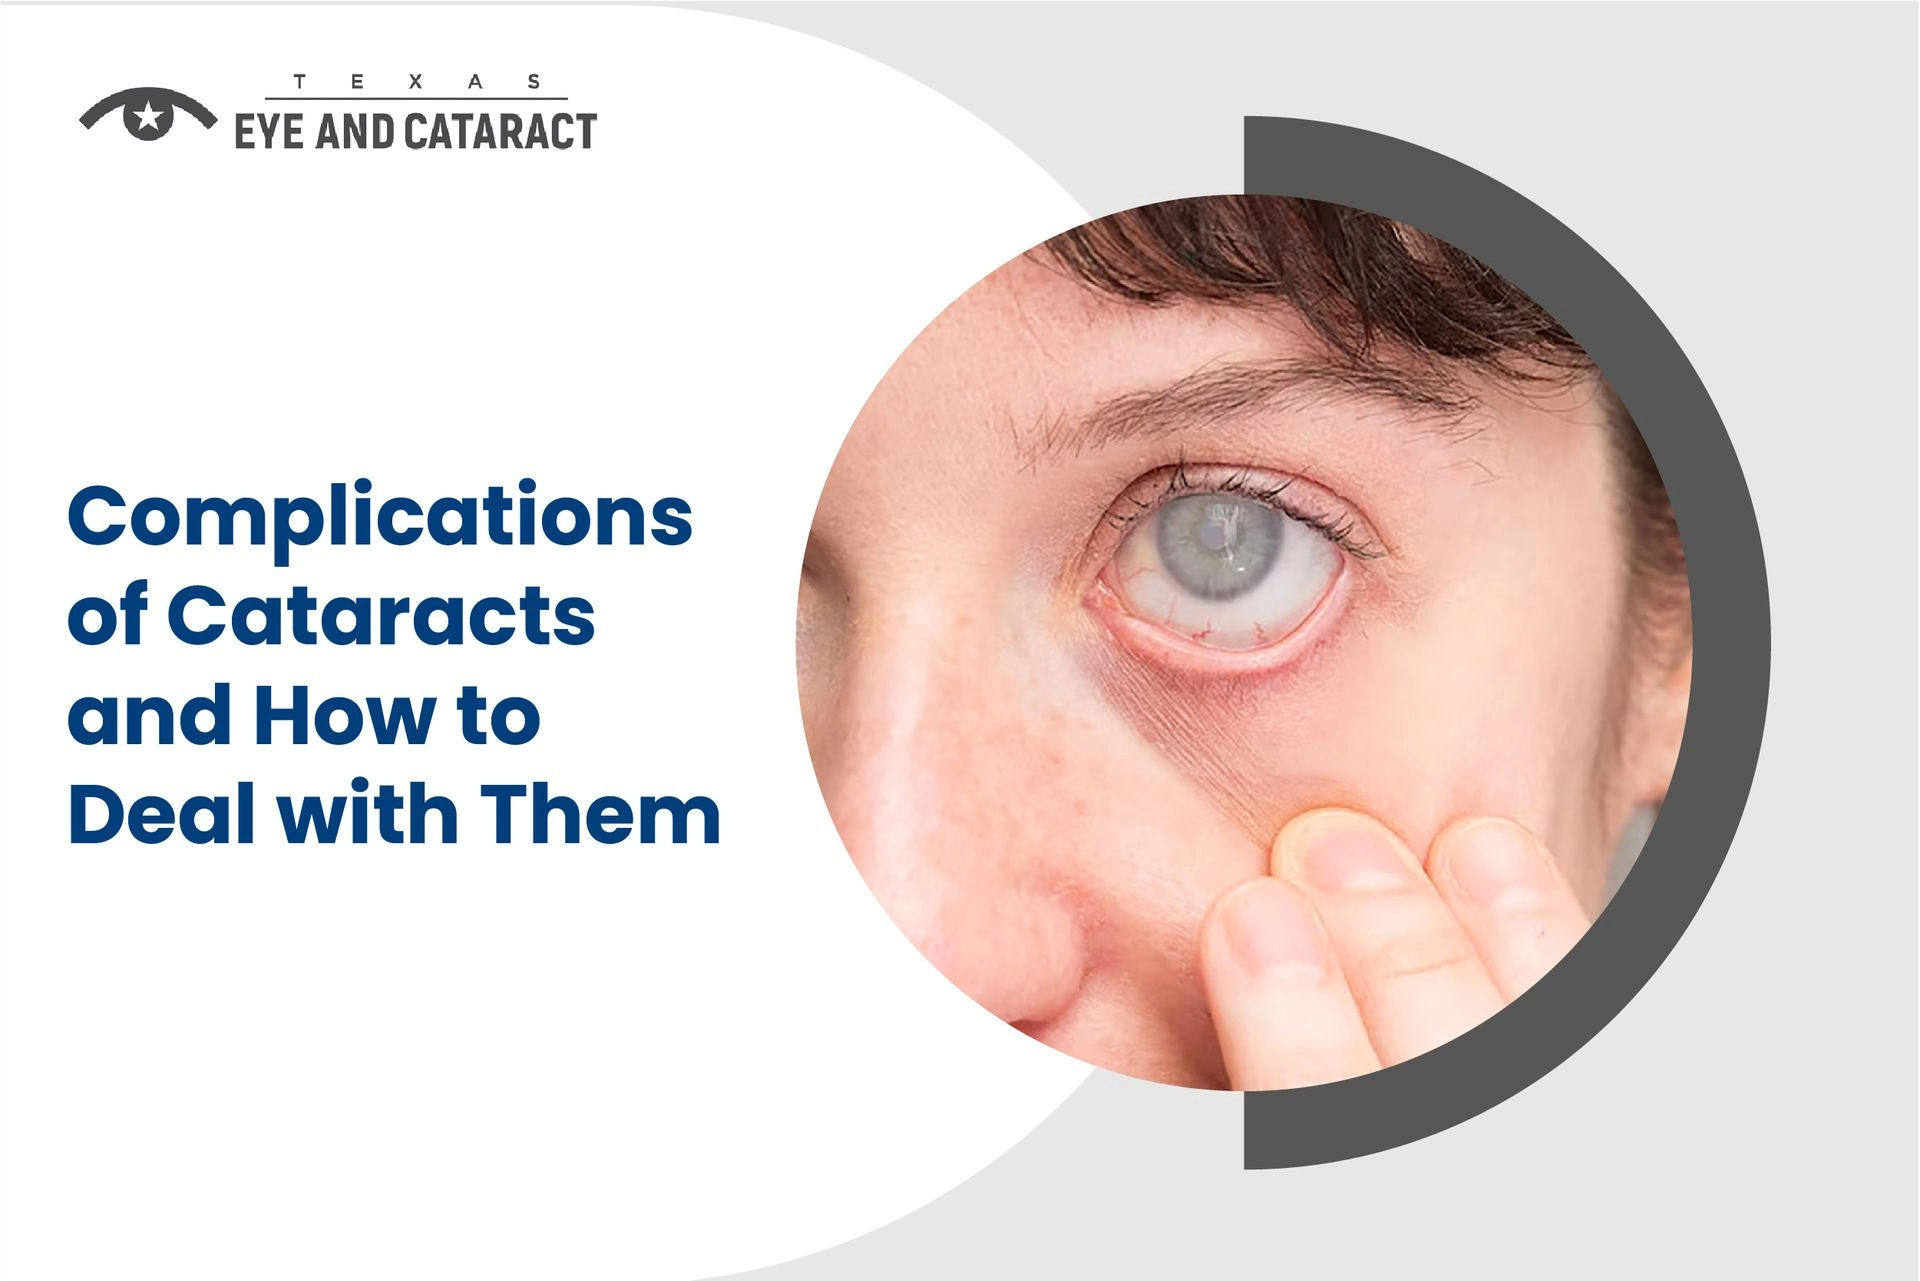 Possible complications and risks of cataract surgery